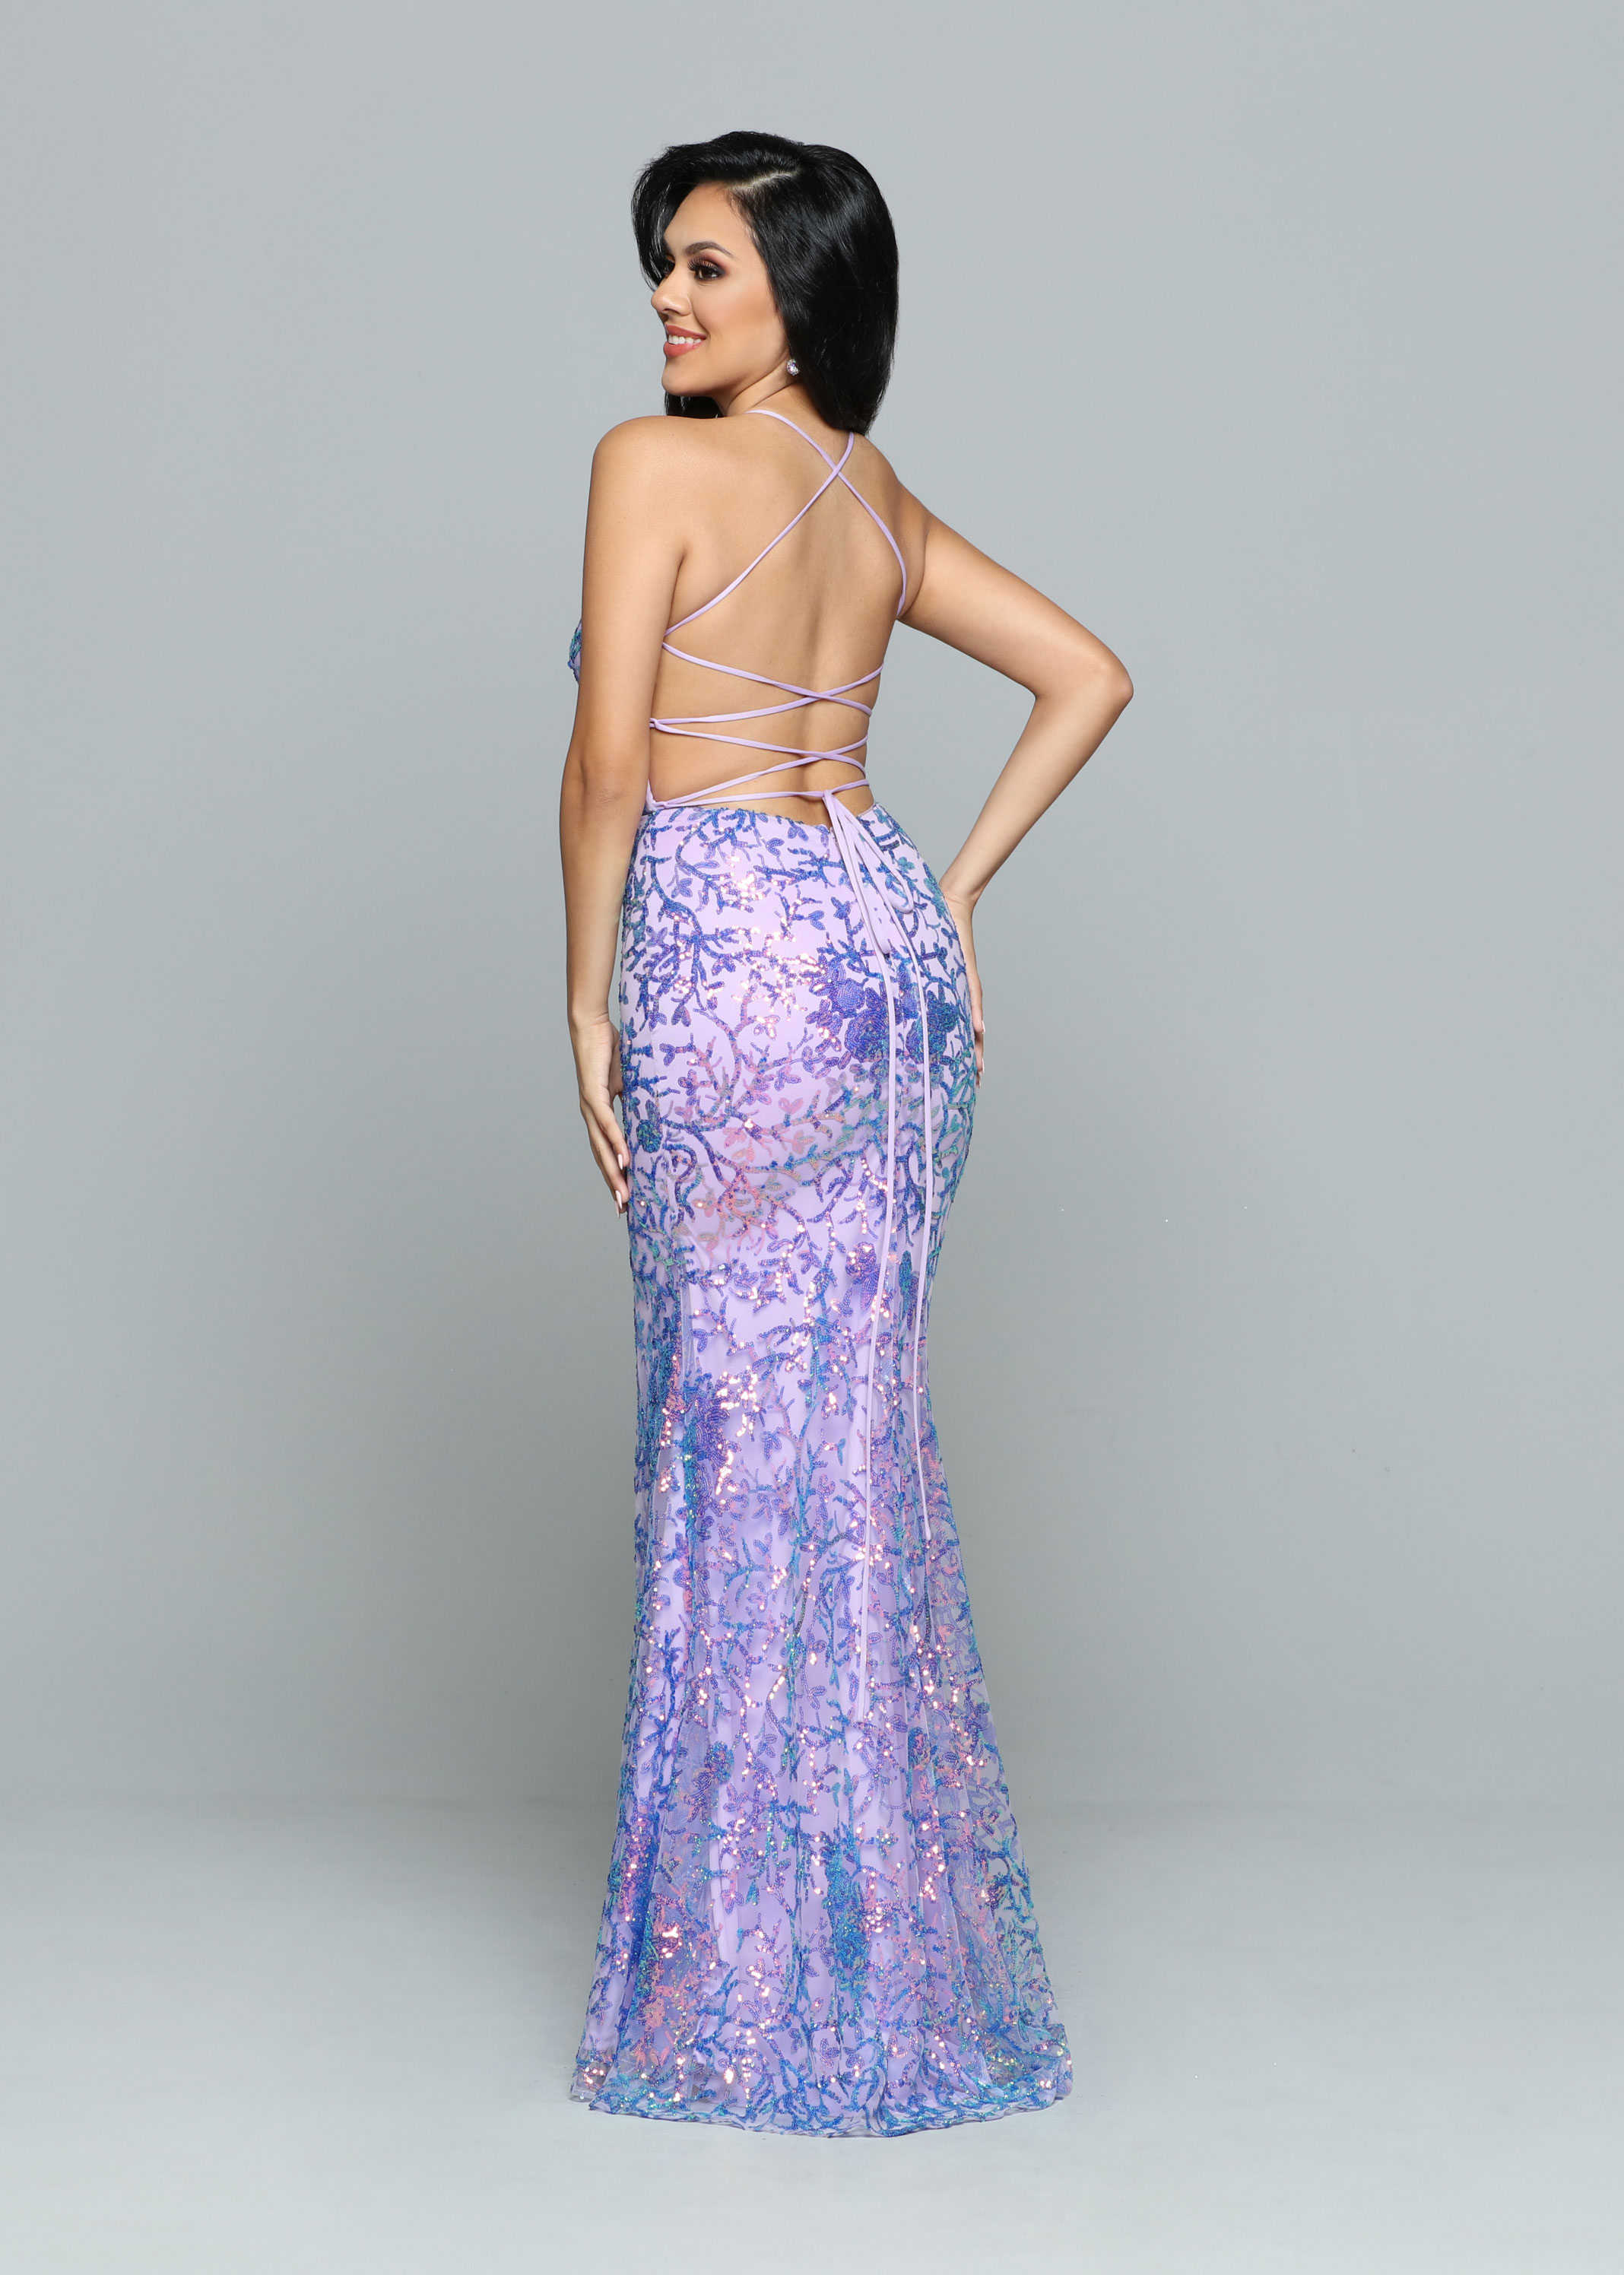 Image showing back view of style #72176